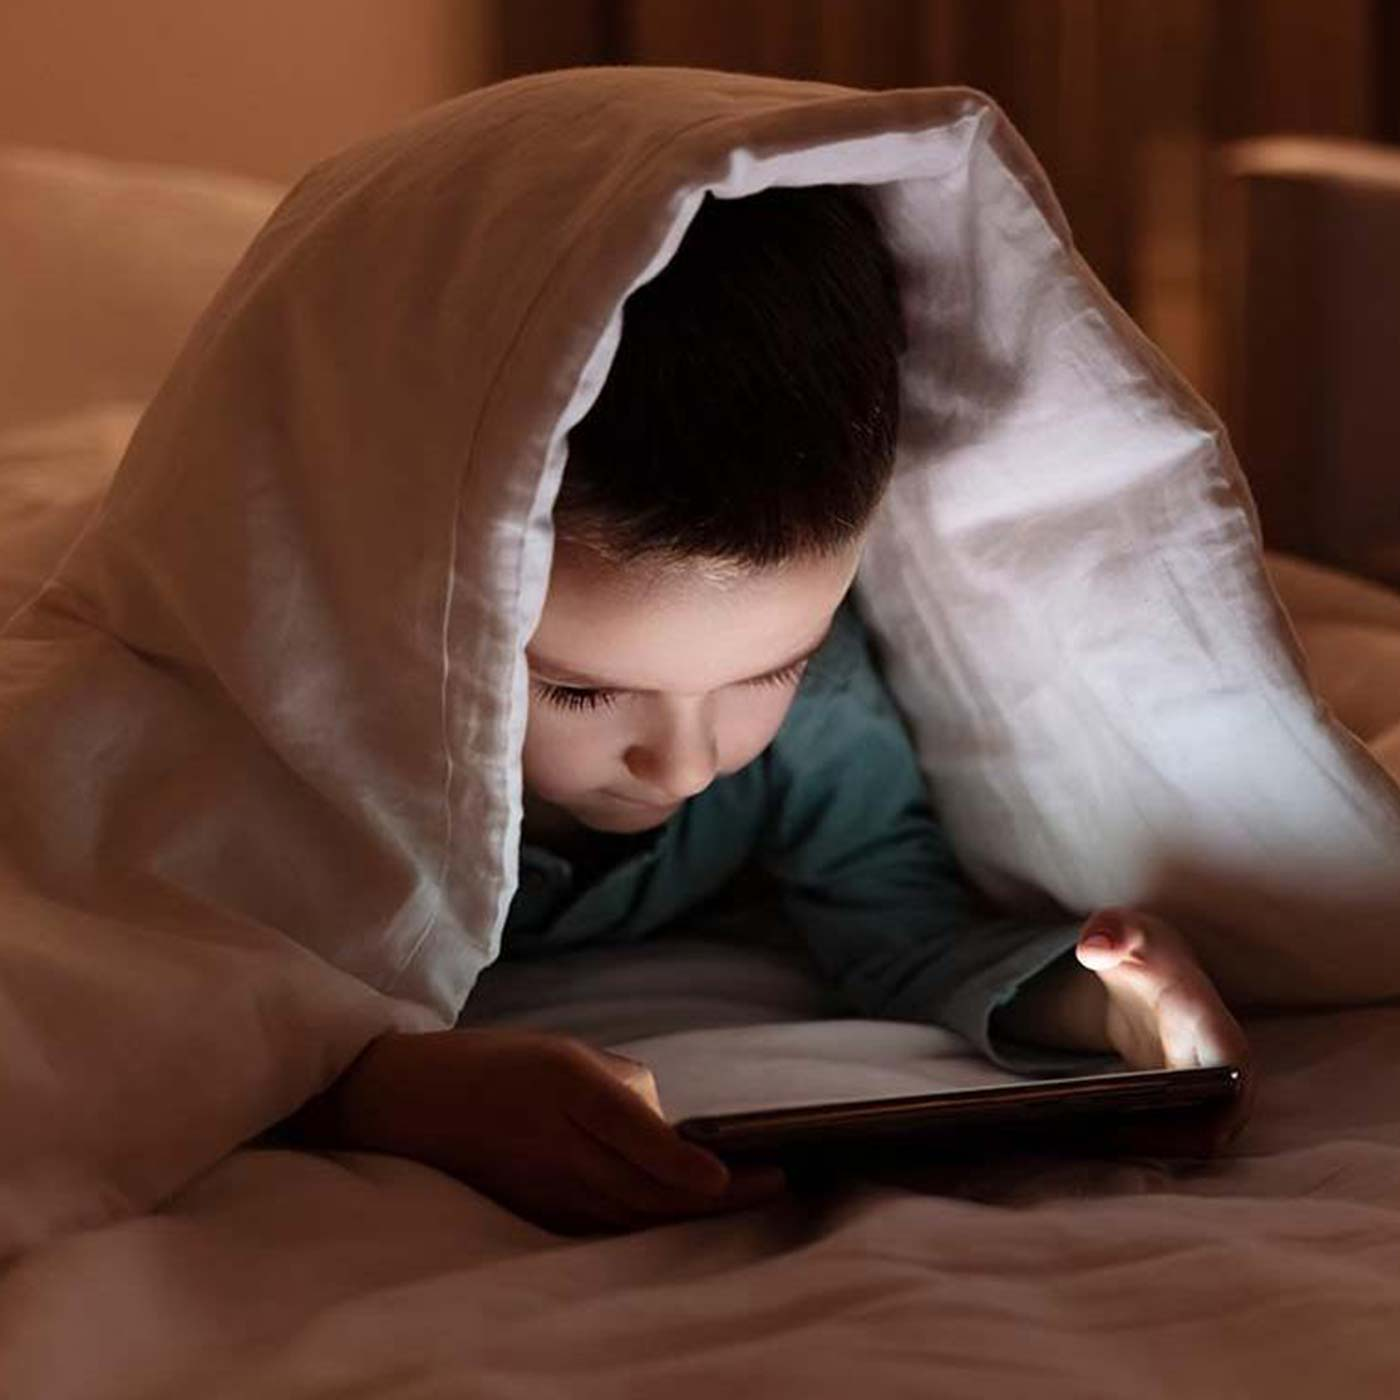 'A little scary': Huge study reveals shocking impact excessive screen time has on kids